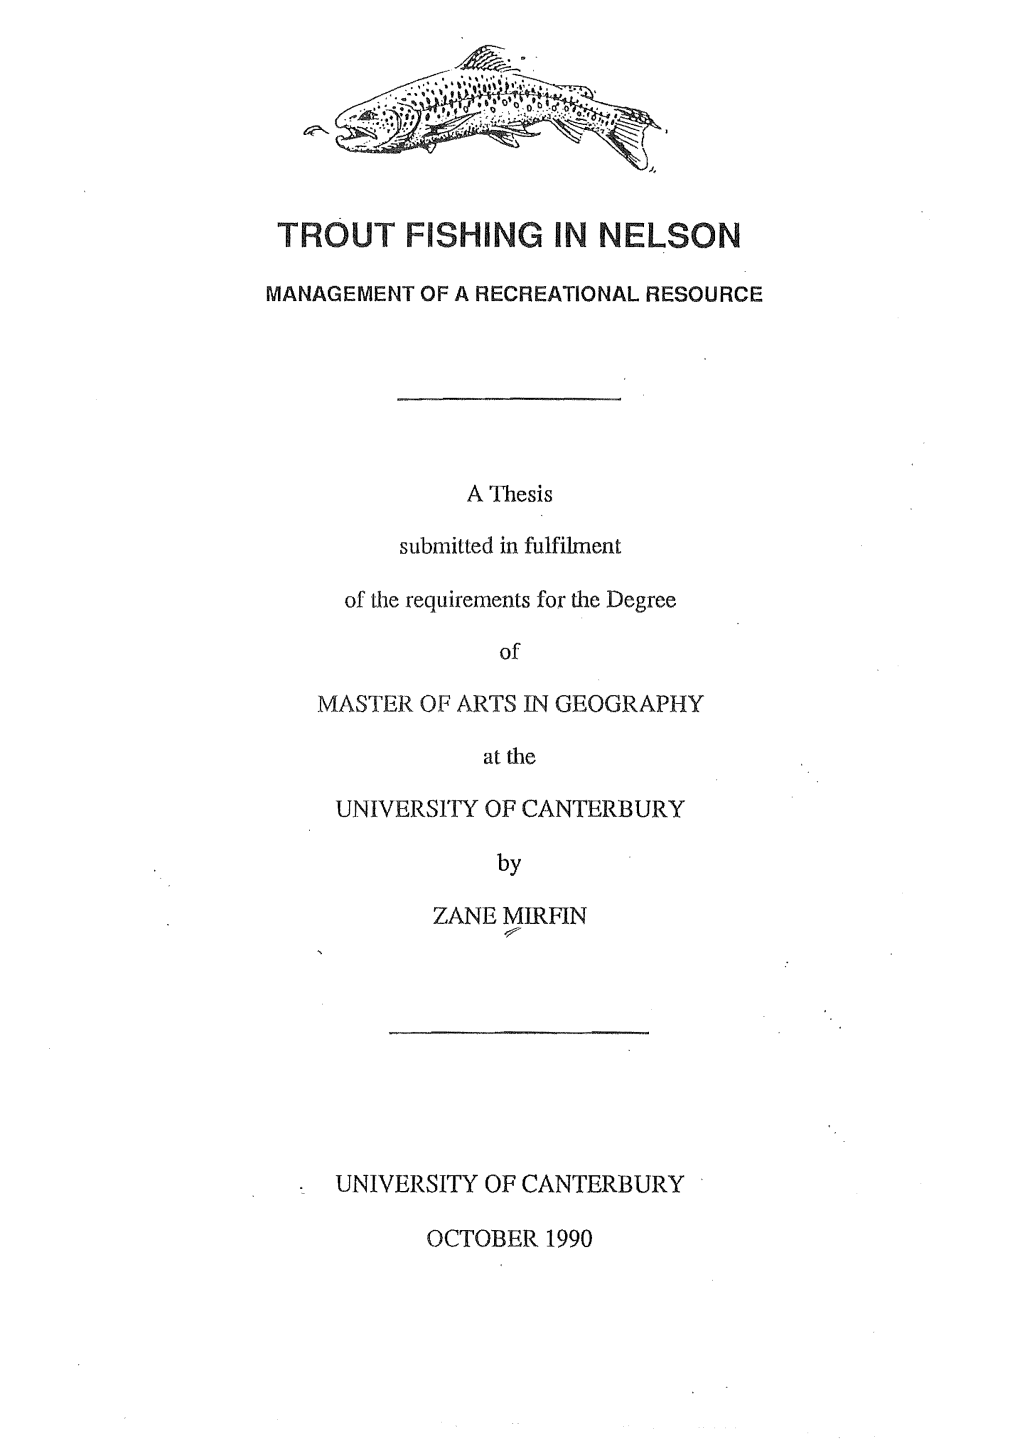 Trout Fishing in Nelson : Management of a Recreational Resource